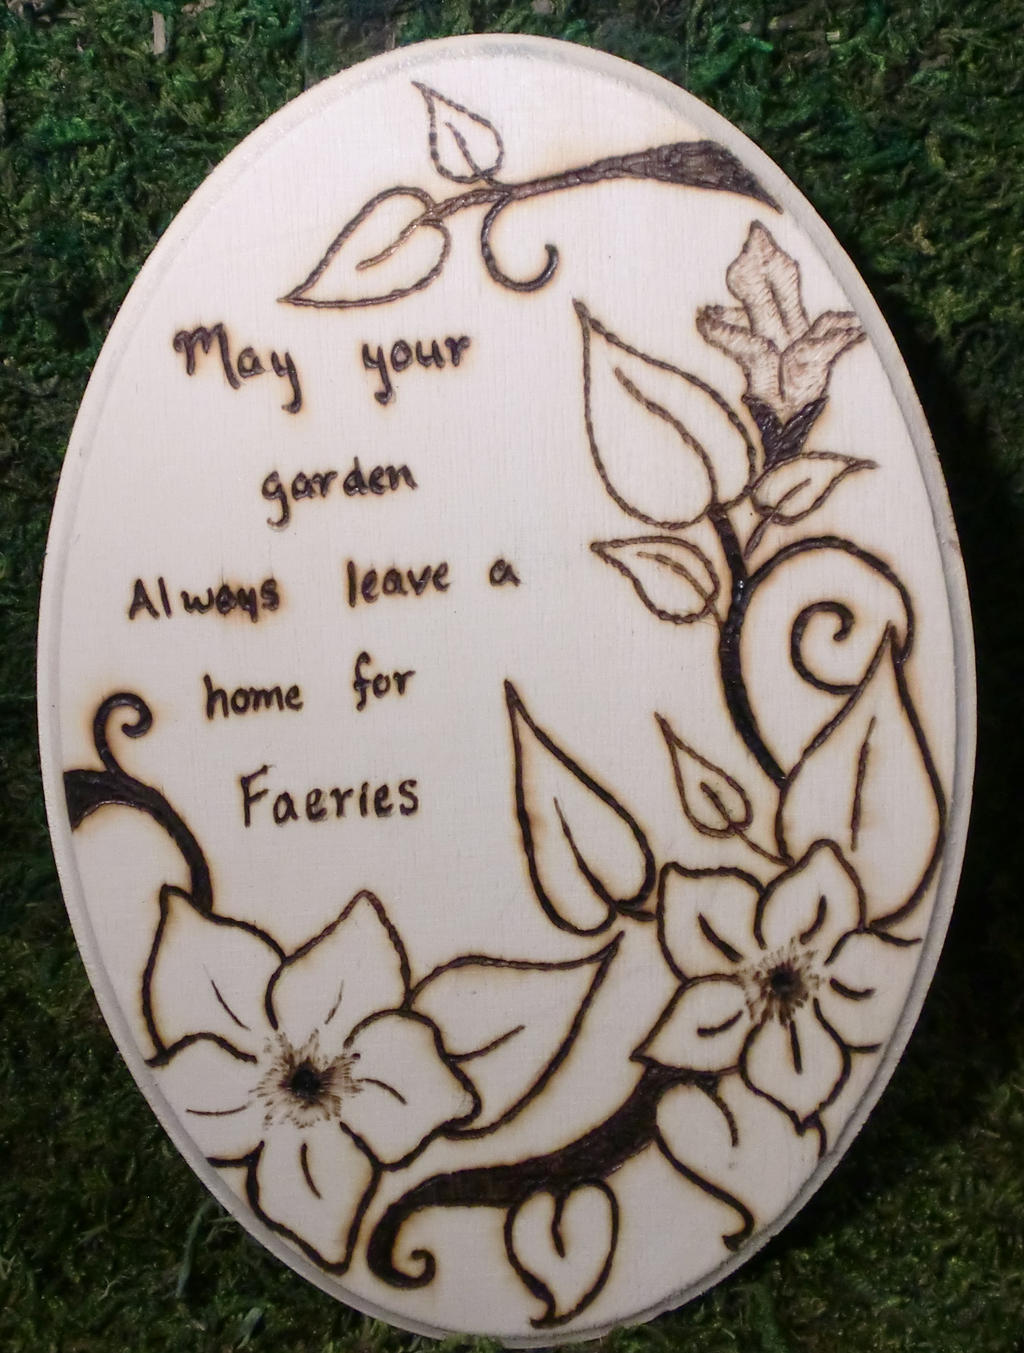 May Your garden always leave room for faeries